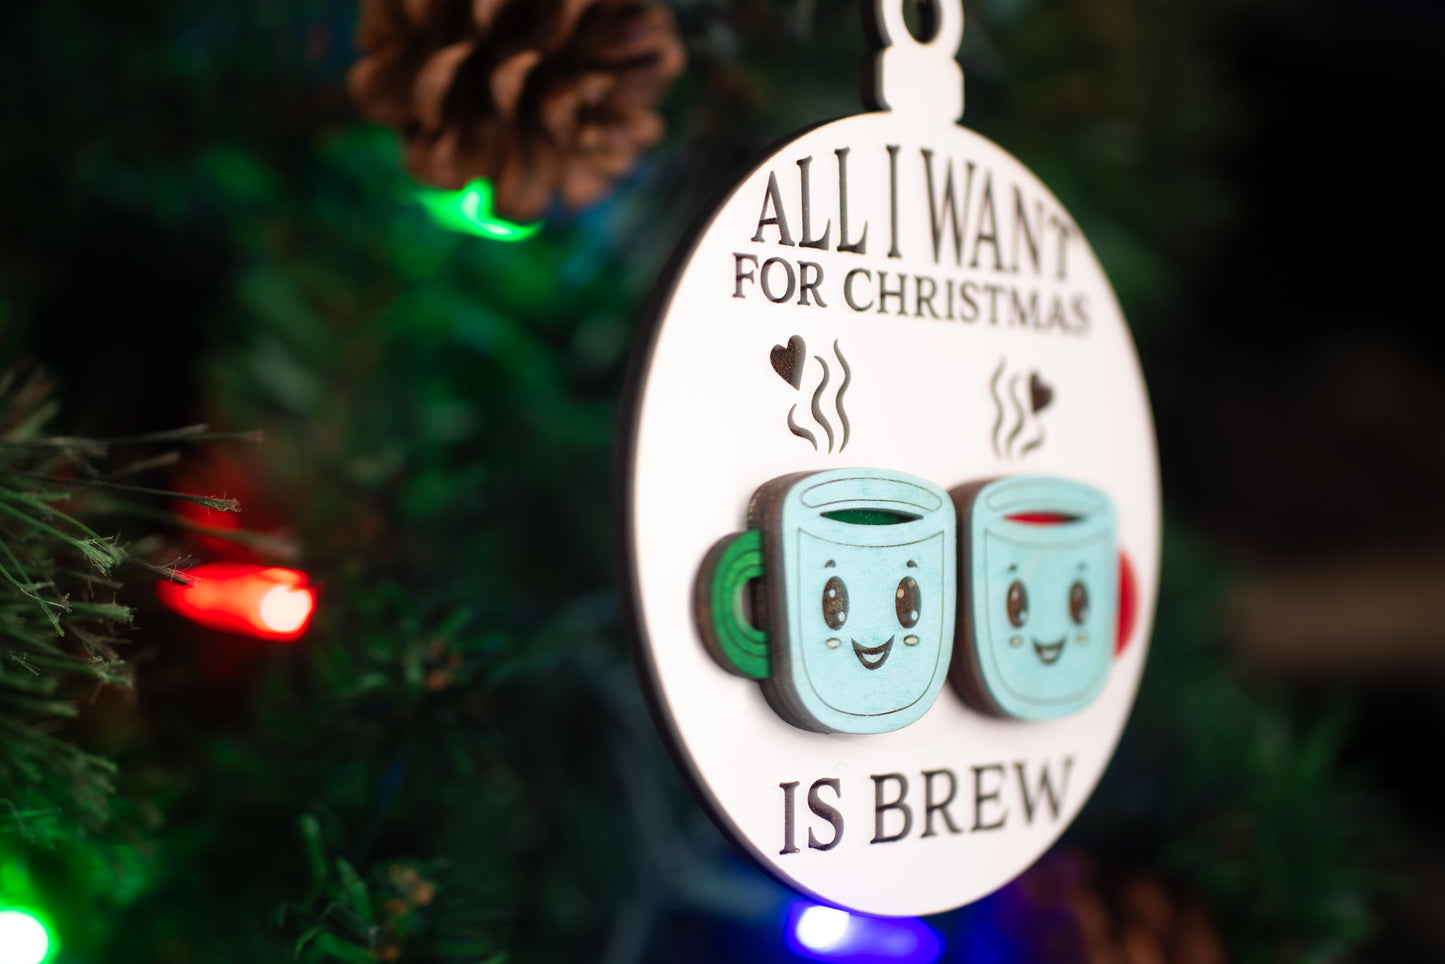 All I Want for Christmas is Brew Christmas Ornament